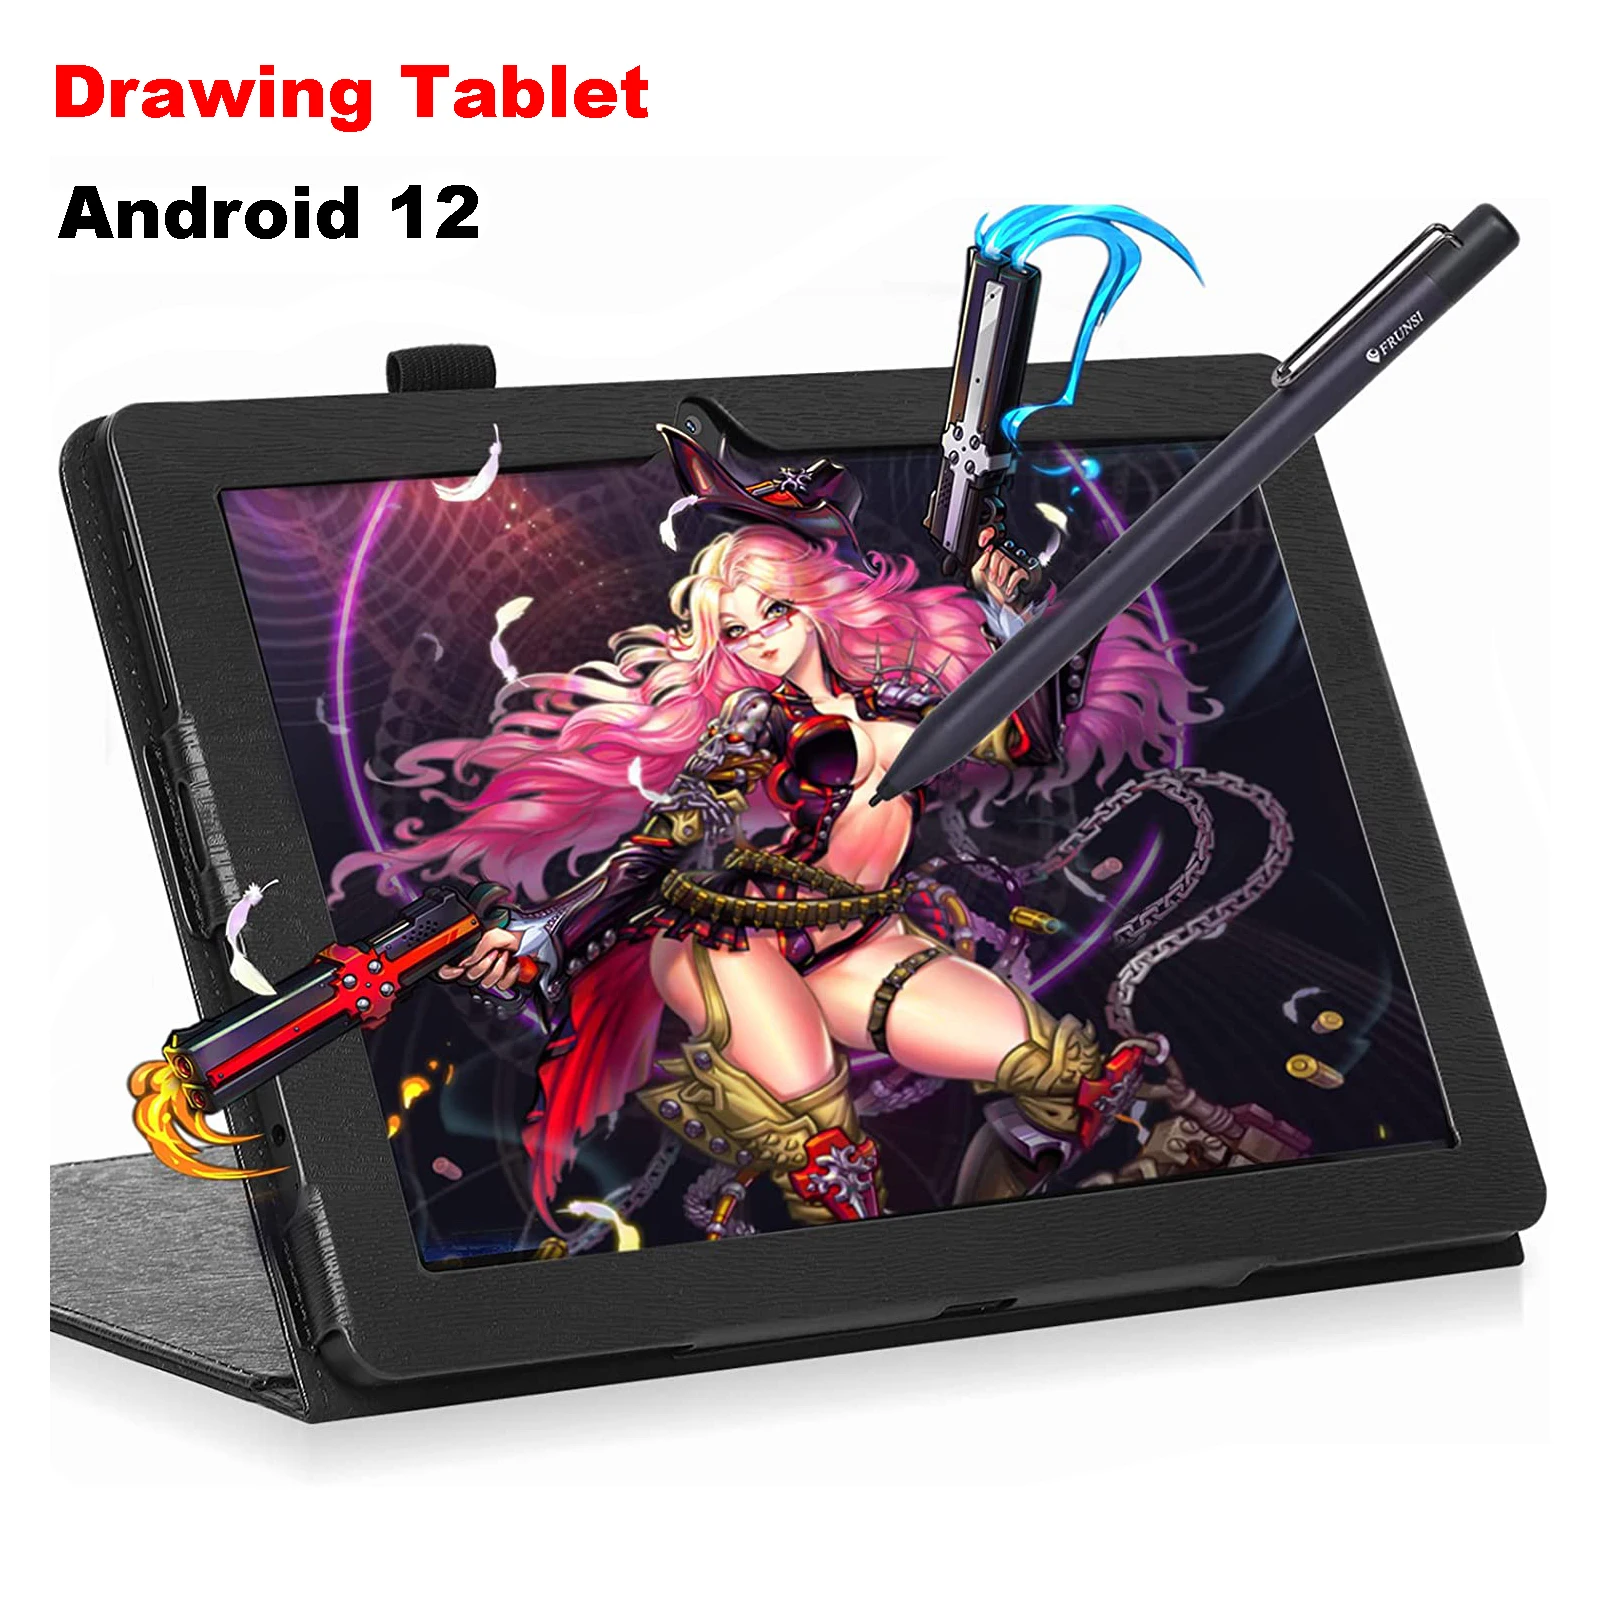 

Frunsi Standalone Drawing Tablet Pad with Android 12 No Computer PC Needed 10 Inch IPS HD Screen WiFi Bluetooth HDMI USB-C